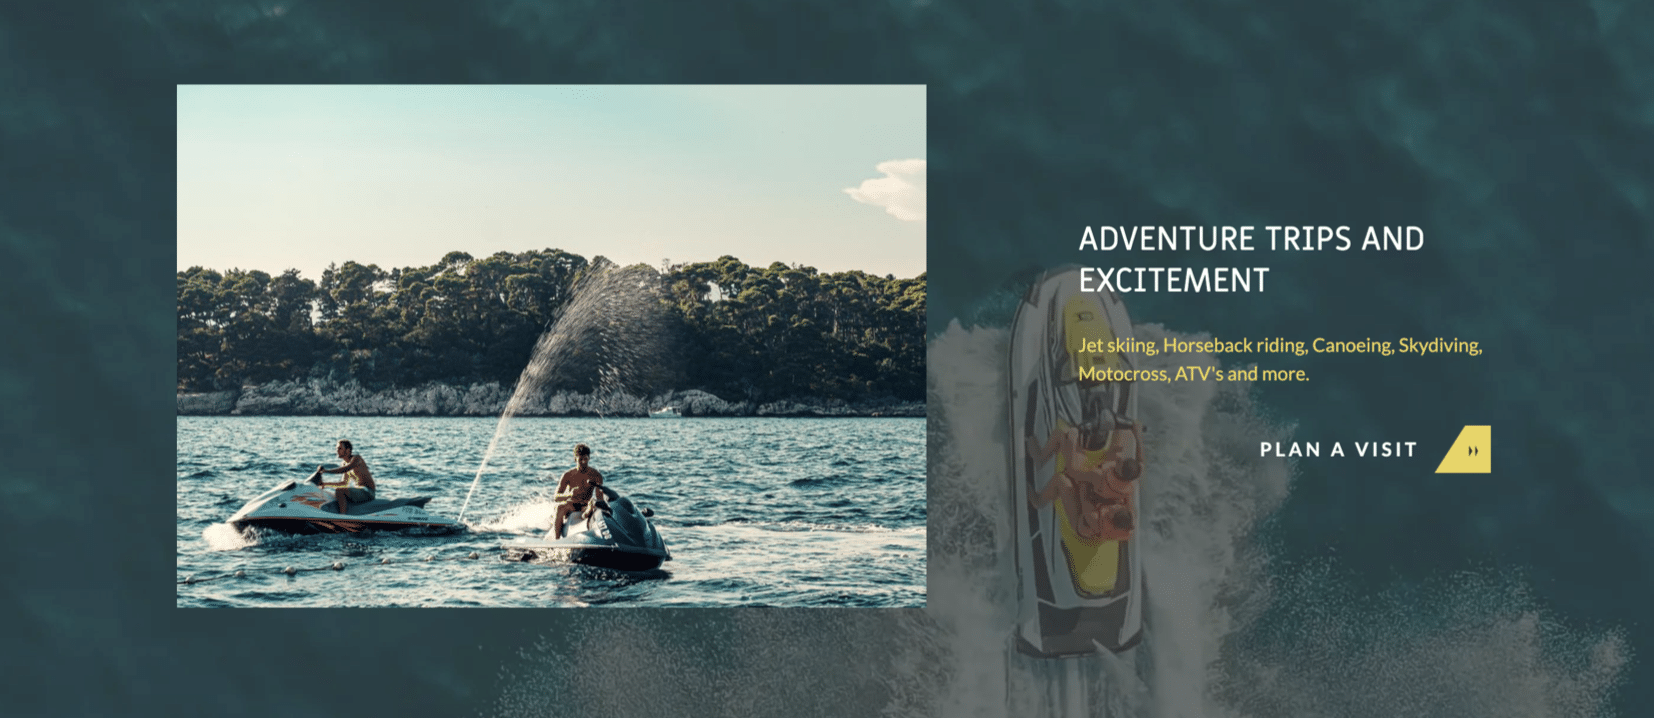 Humphrey's County webpage for Adventure Trips and Excitement with image of two people on jet skis.